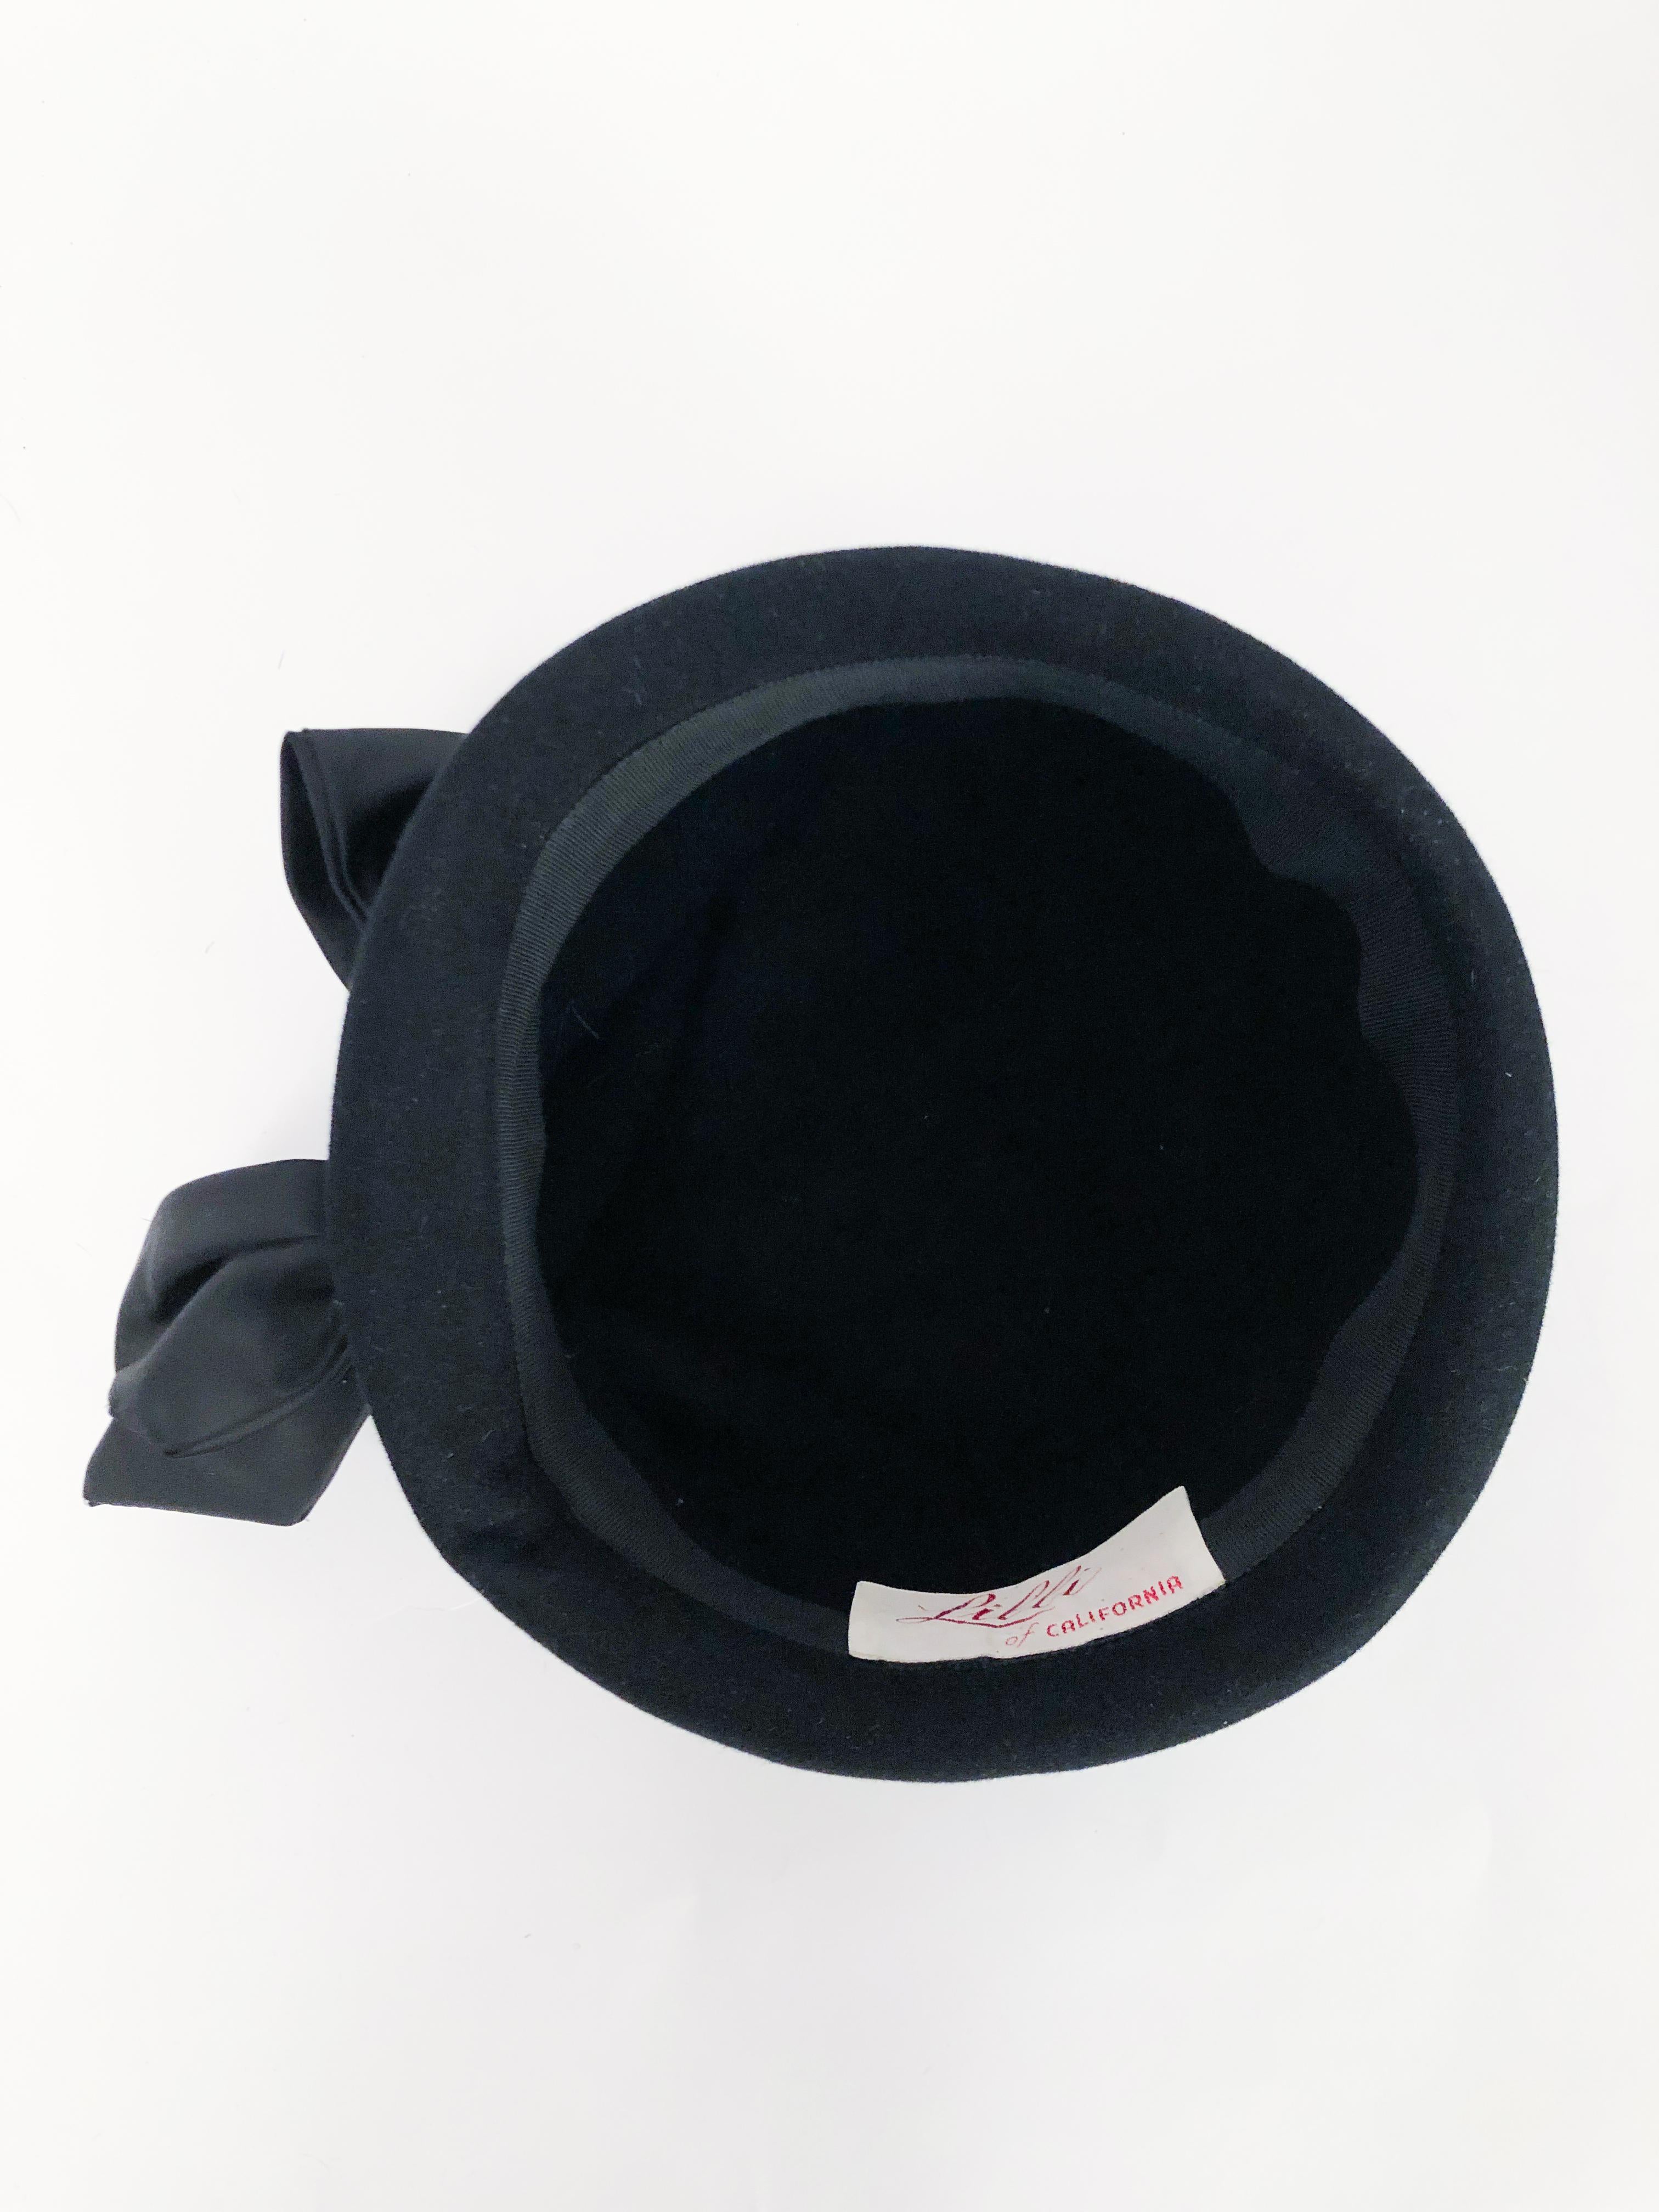 1960s Lilli Black Cashmere Cloche with Satin Charmeuse Bow and Band 4